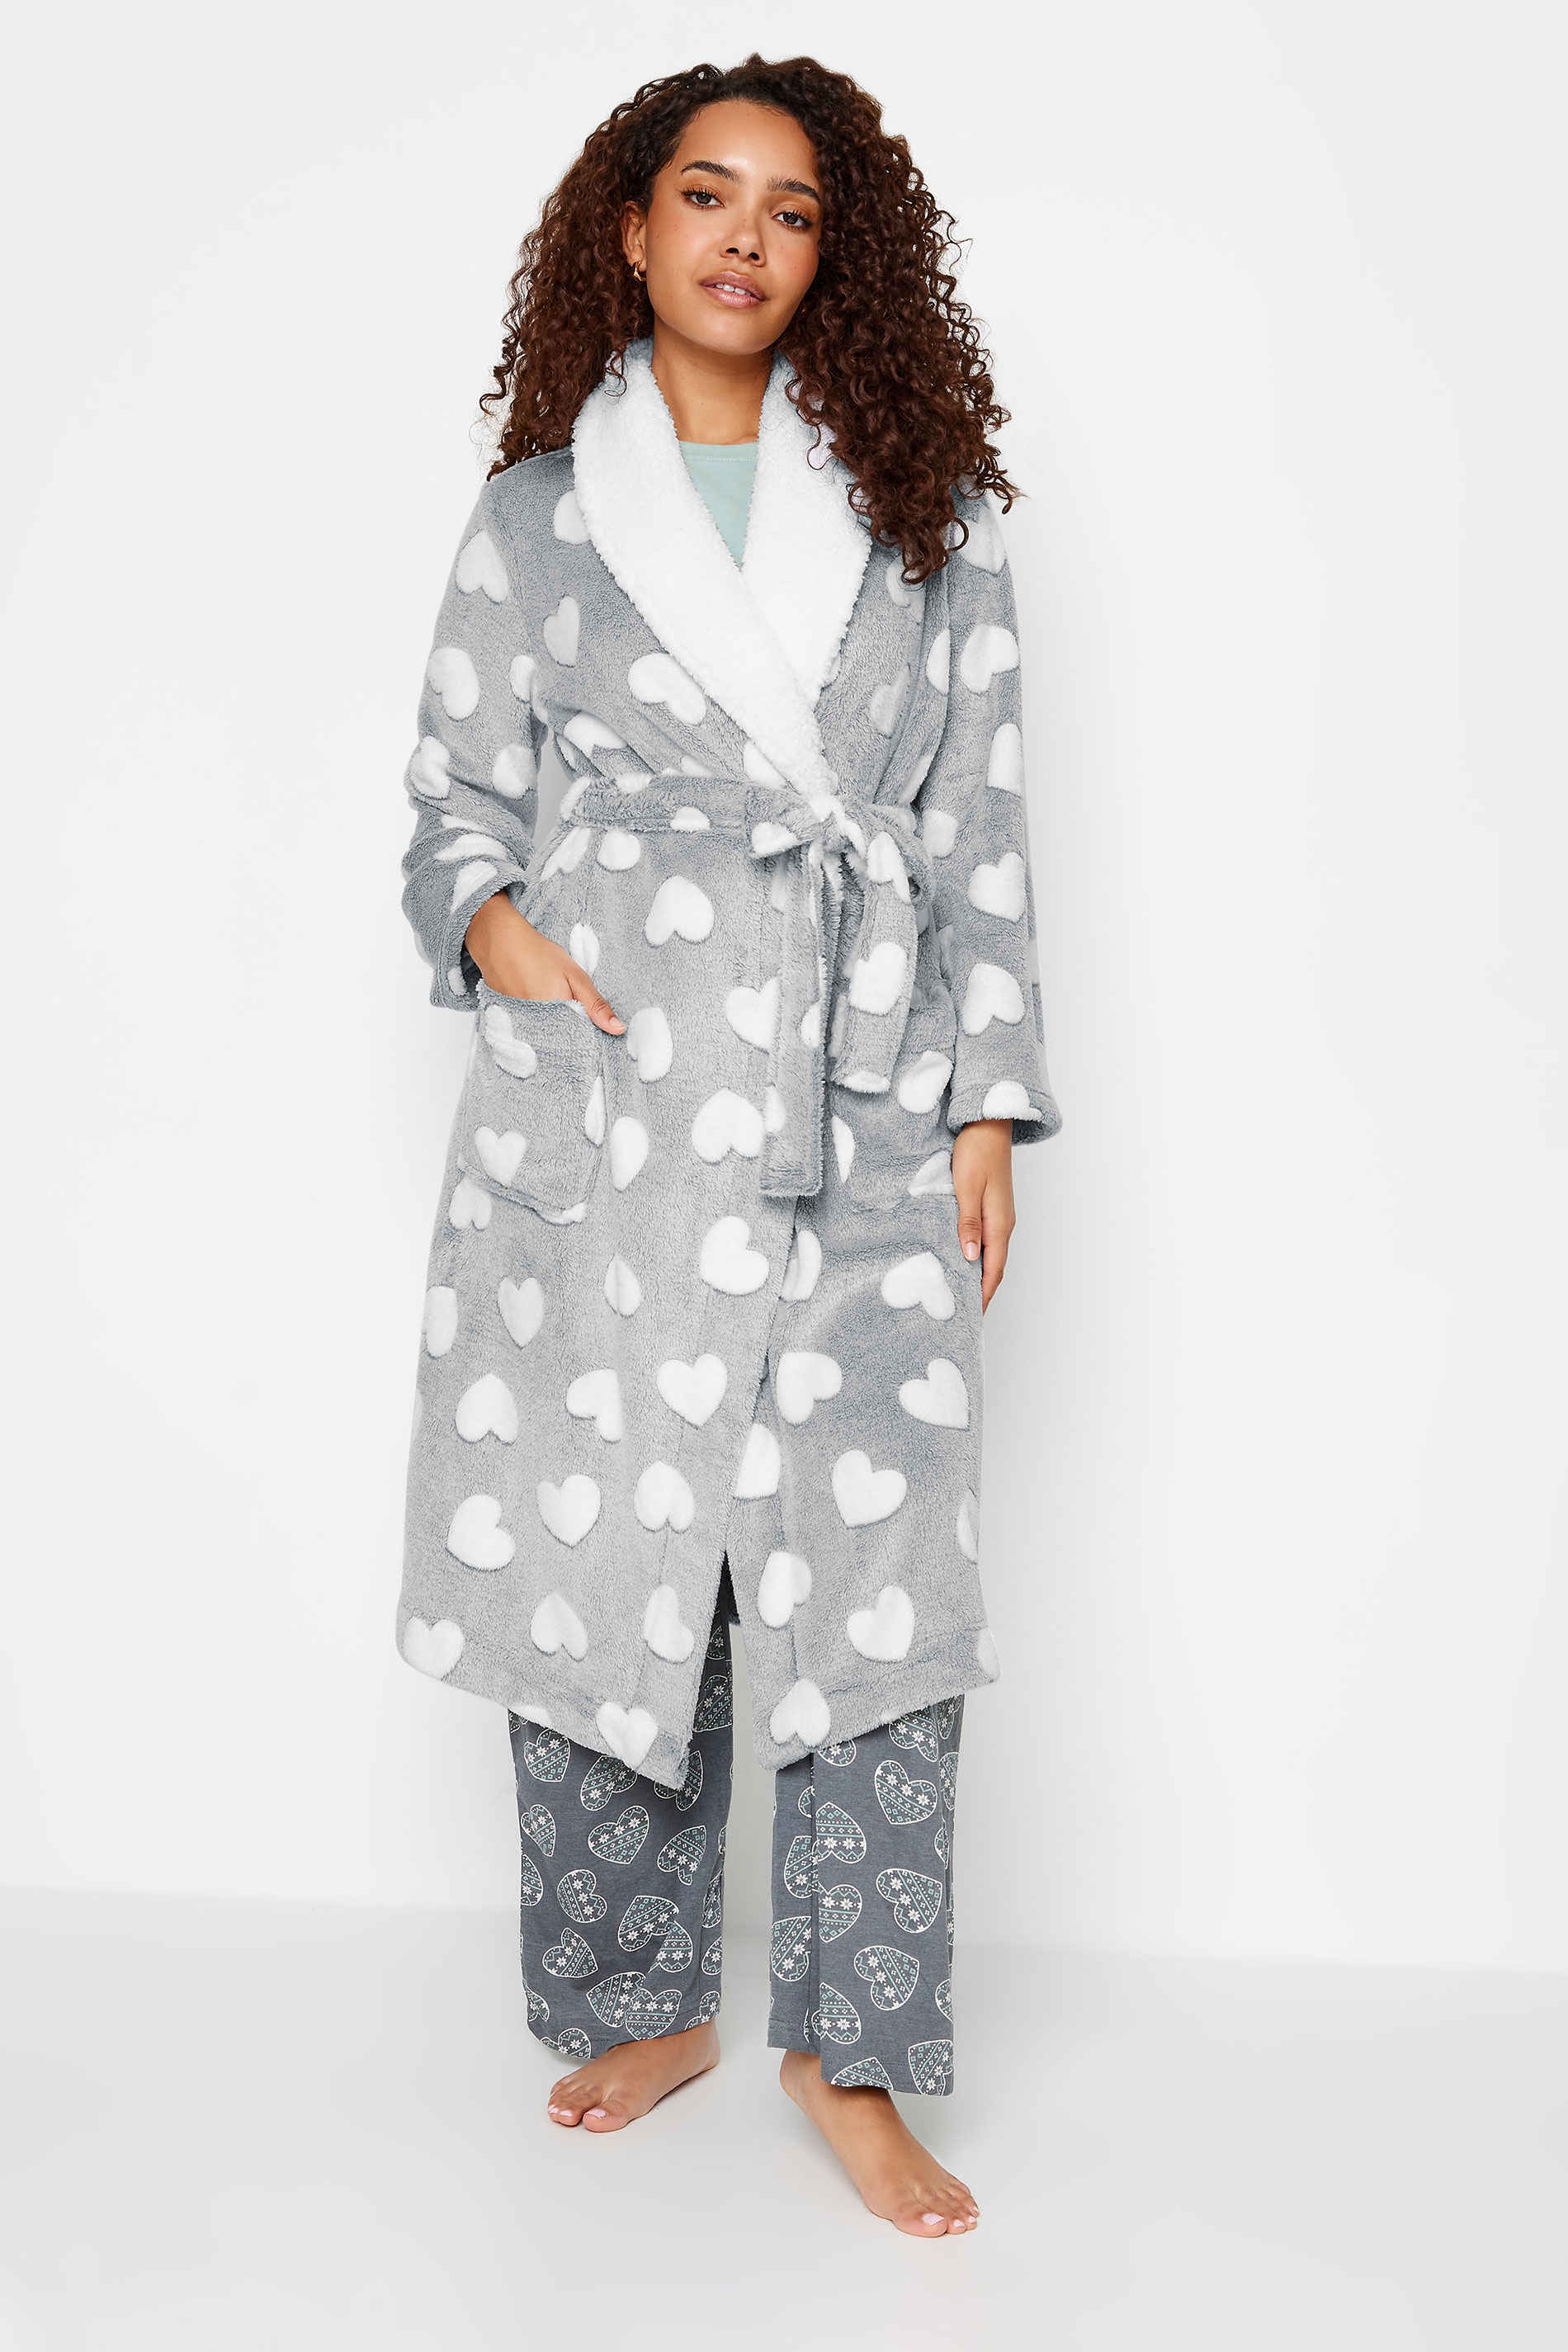 M&Co Grey Soft Touch Heart Print Hooded Dressing Gown | M&Co 1